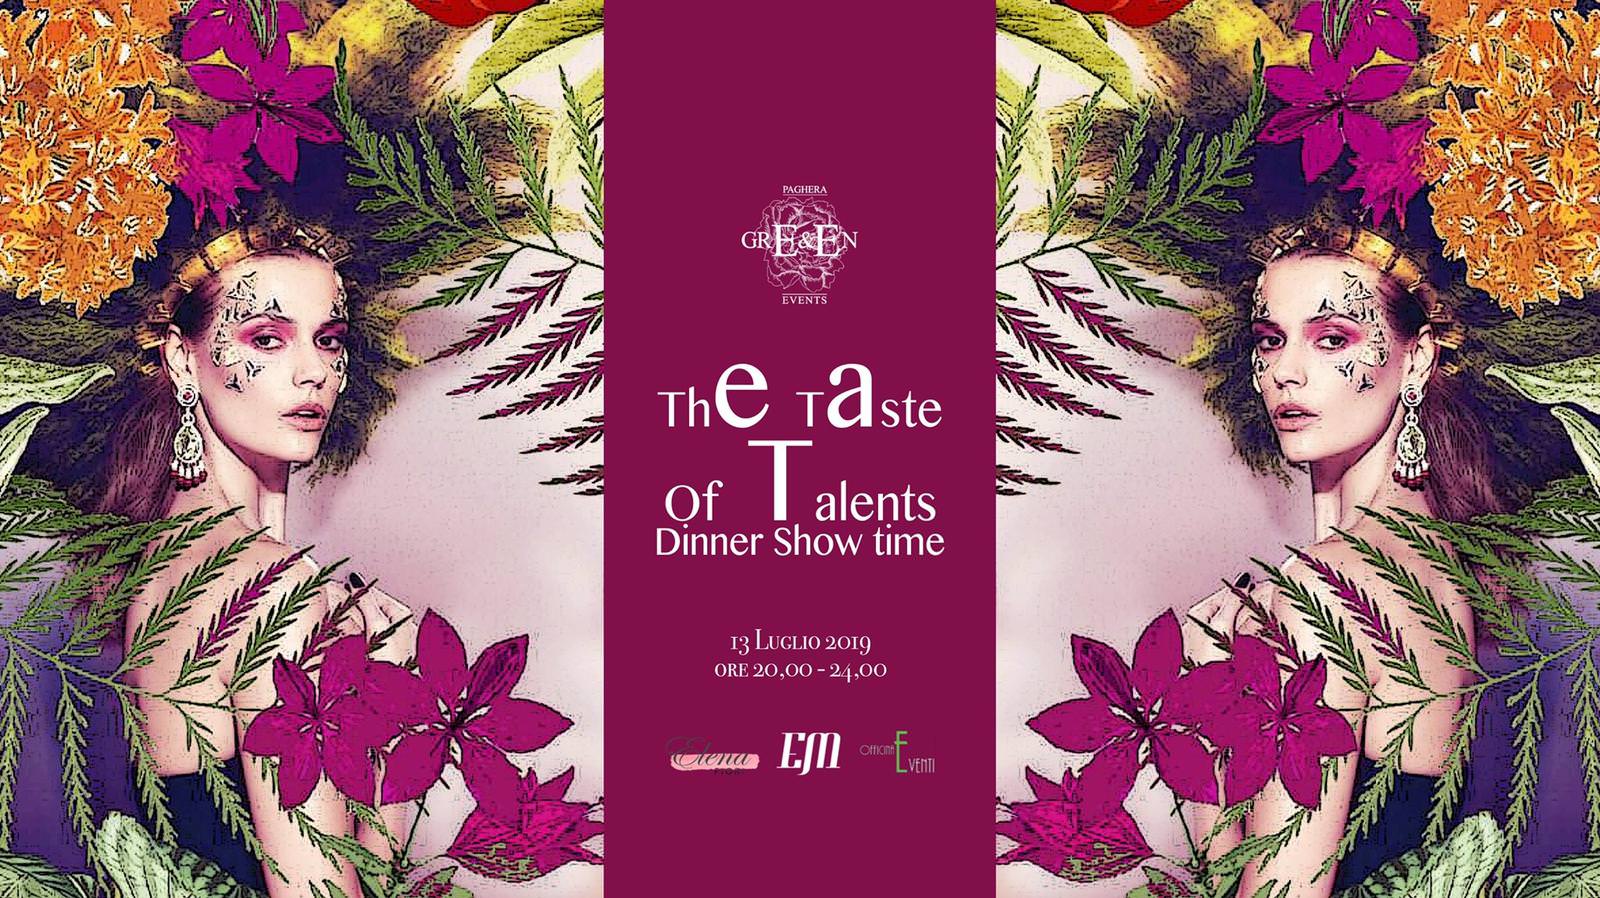 Evento Dinner Show Time THE TASTE OF TALENTS